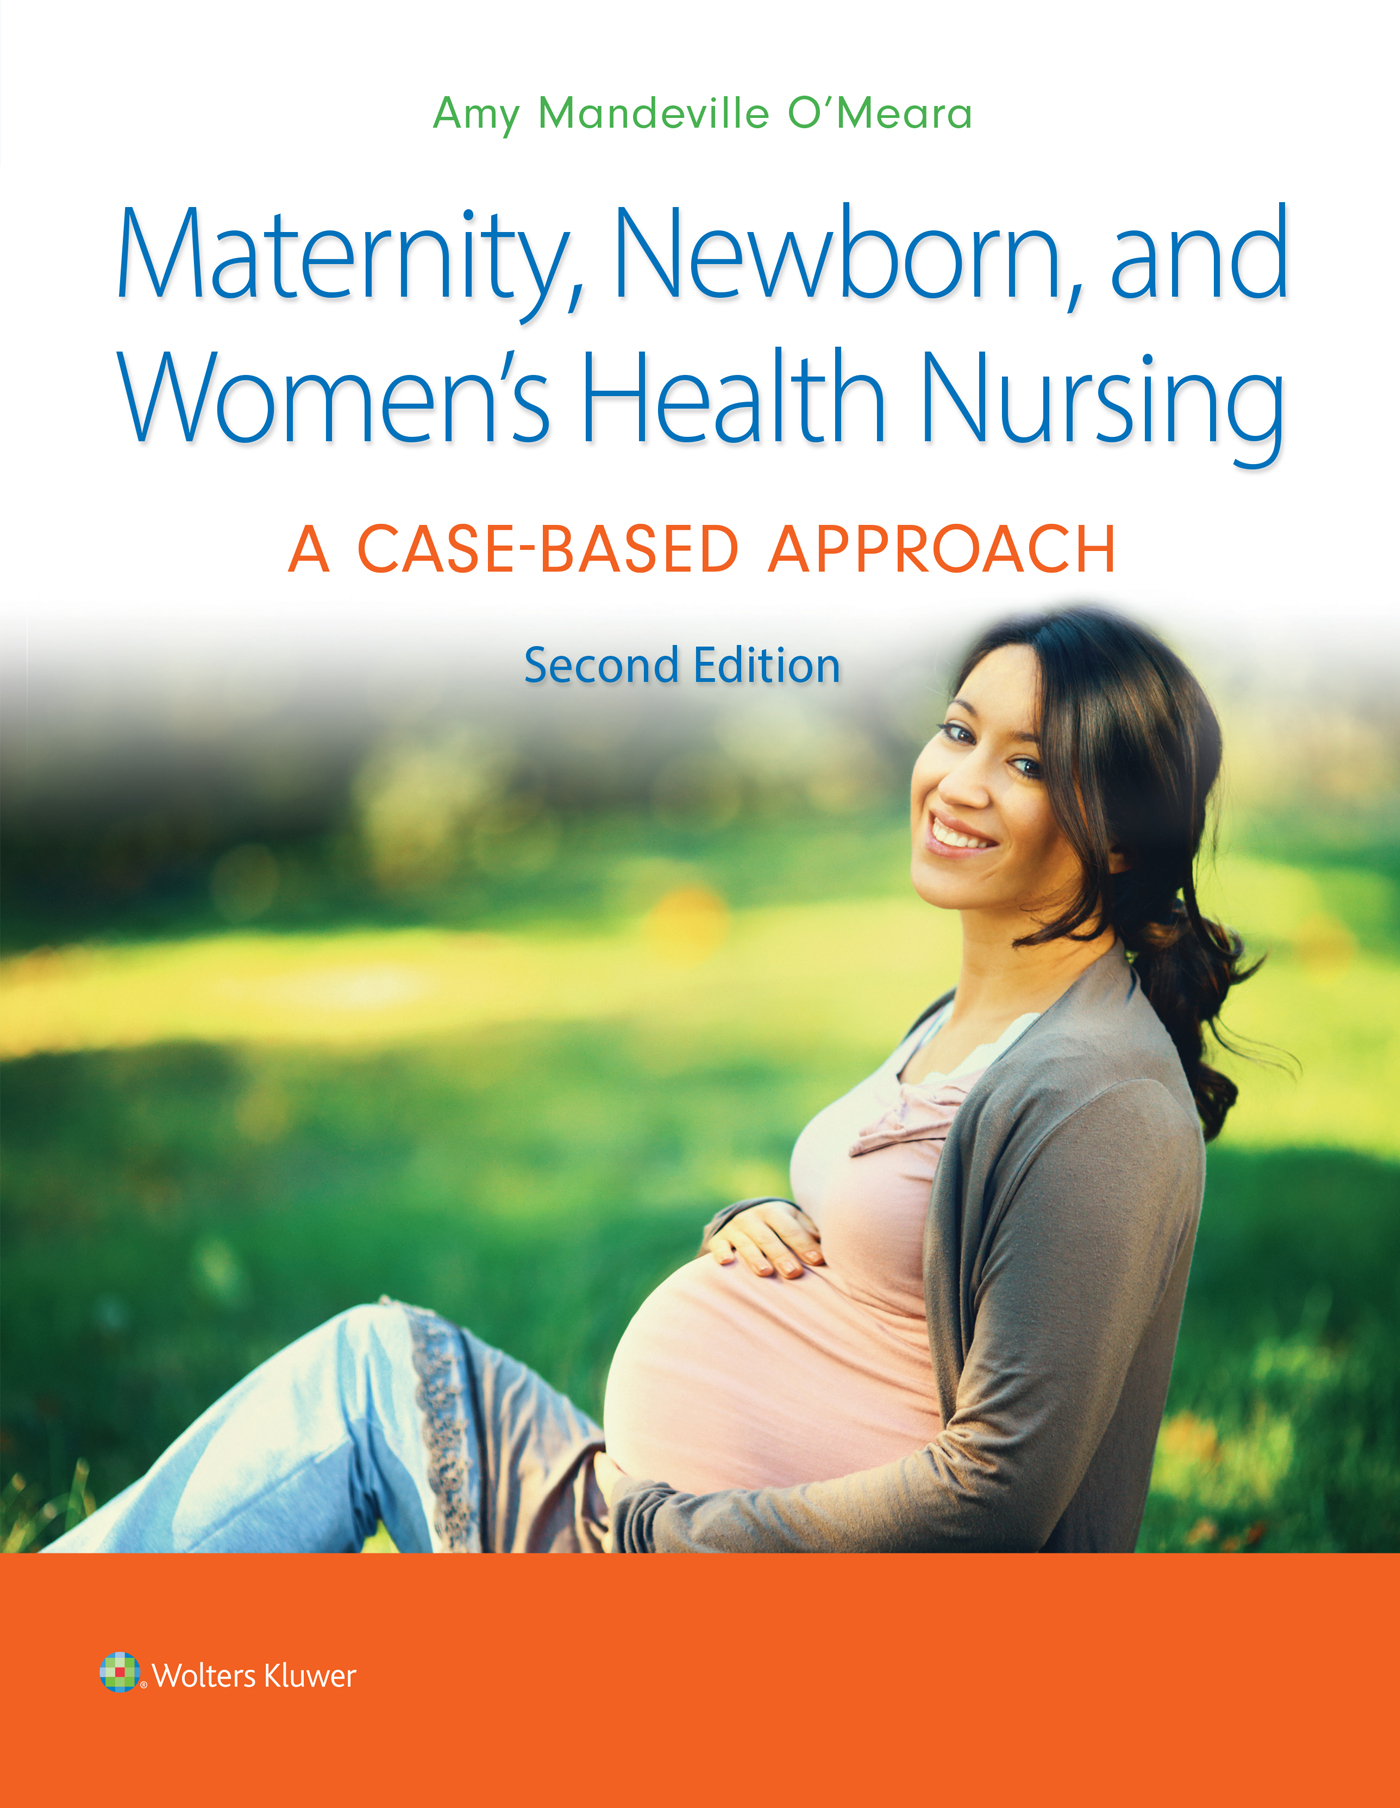 Maternity, Newborn, and Women’s Health Nursing: A Case-Based Approach